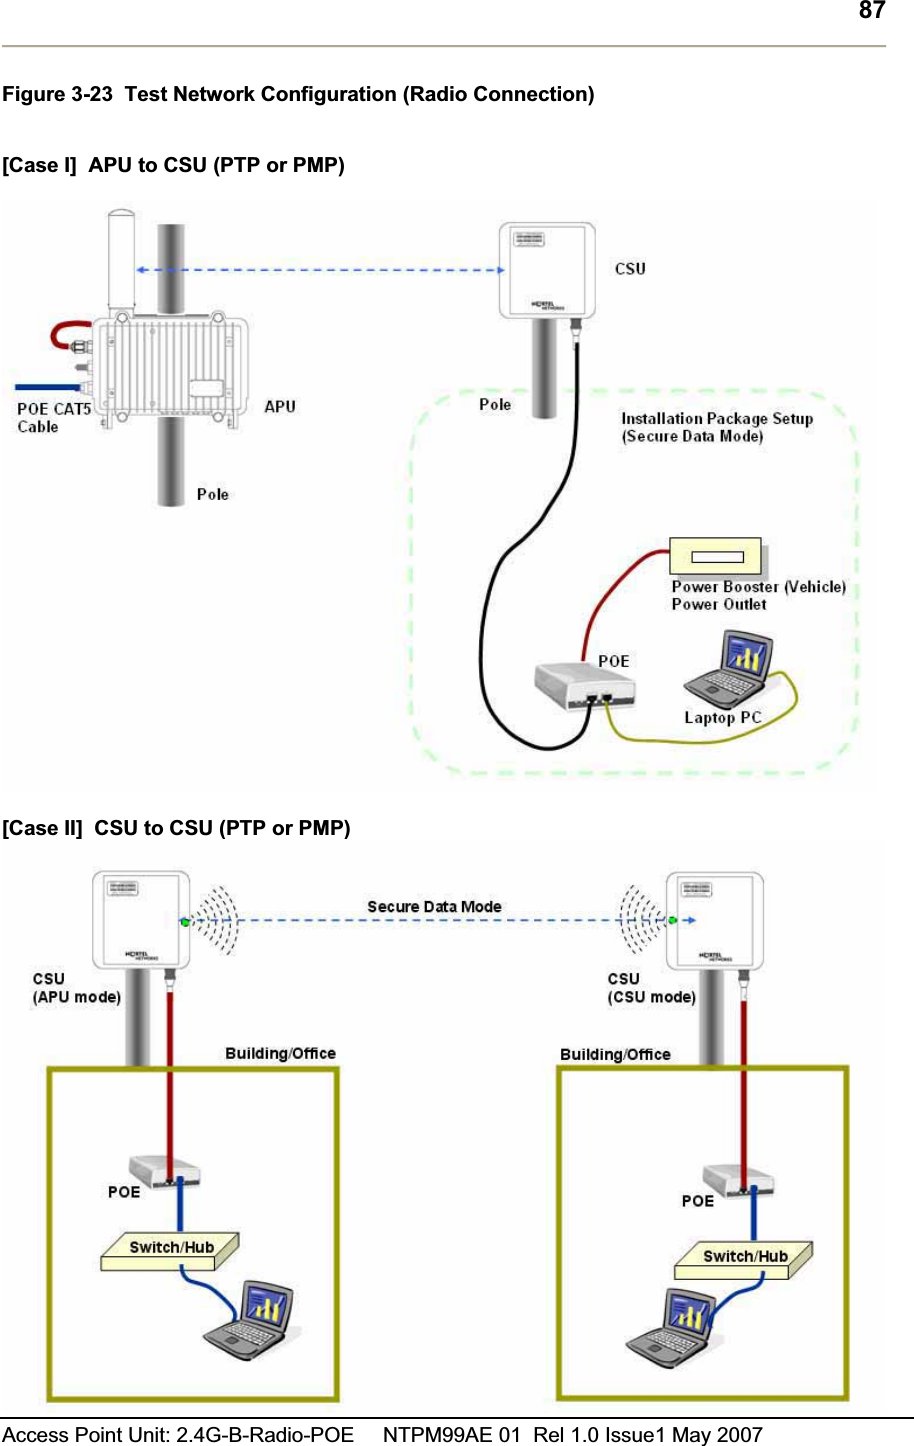 87Access Point Unit: 2.4G-B-Radio-POE     NTPM99AE 01  Rel 1.0 Issue1 May 2007 Figure 3-23  Test Network Configuration (Radio Connection) [Case I]  APU to CSU (PTP or PMP) [Case II]  CSU to CSU (PTP or PMP) 